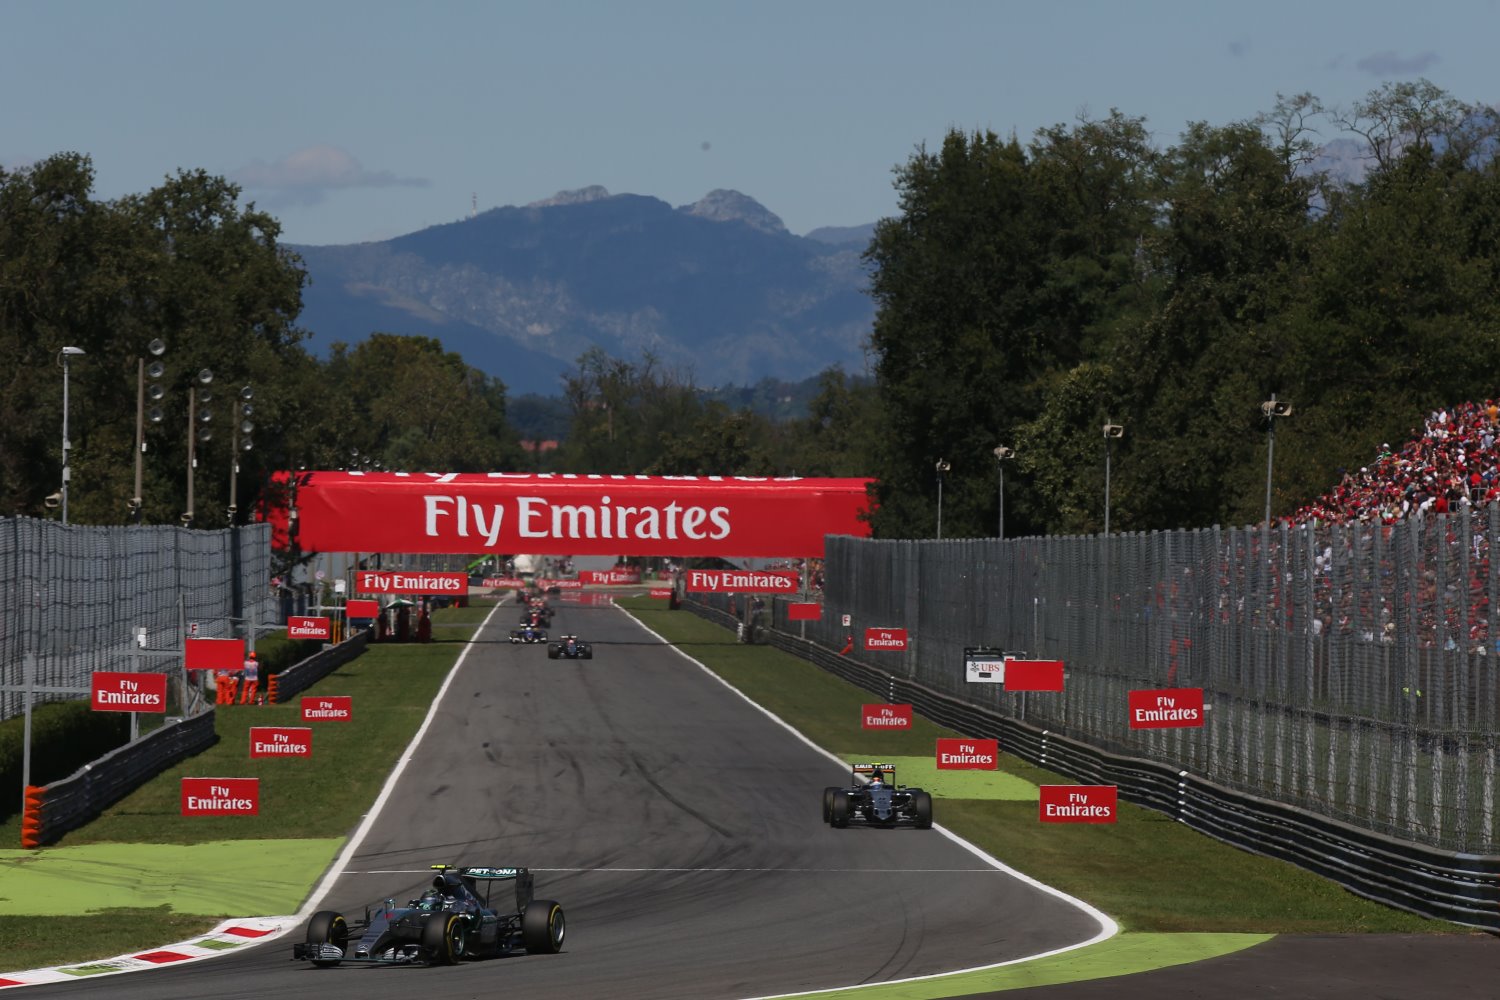 Monza says its confident, but unless they pay Bernie what he wants, they won't have a race